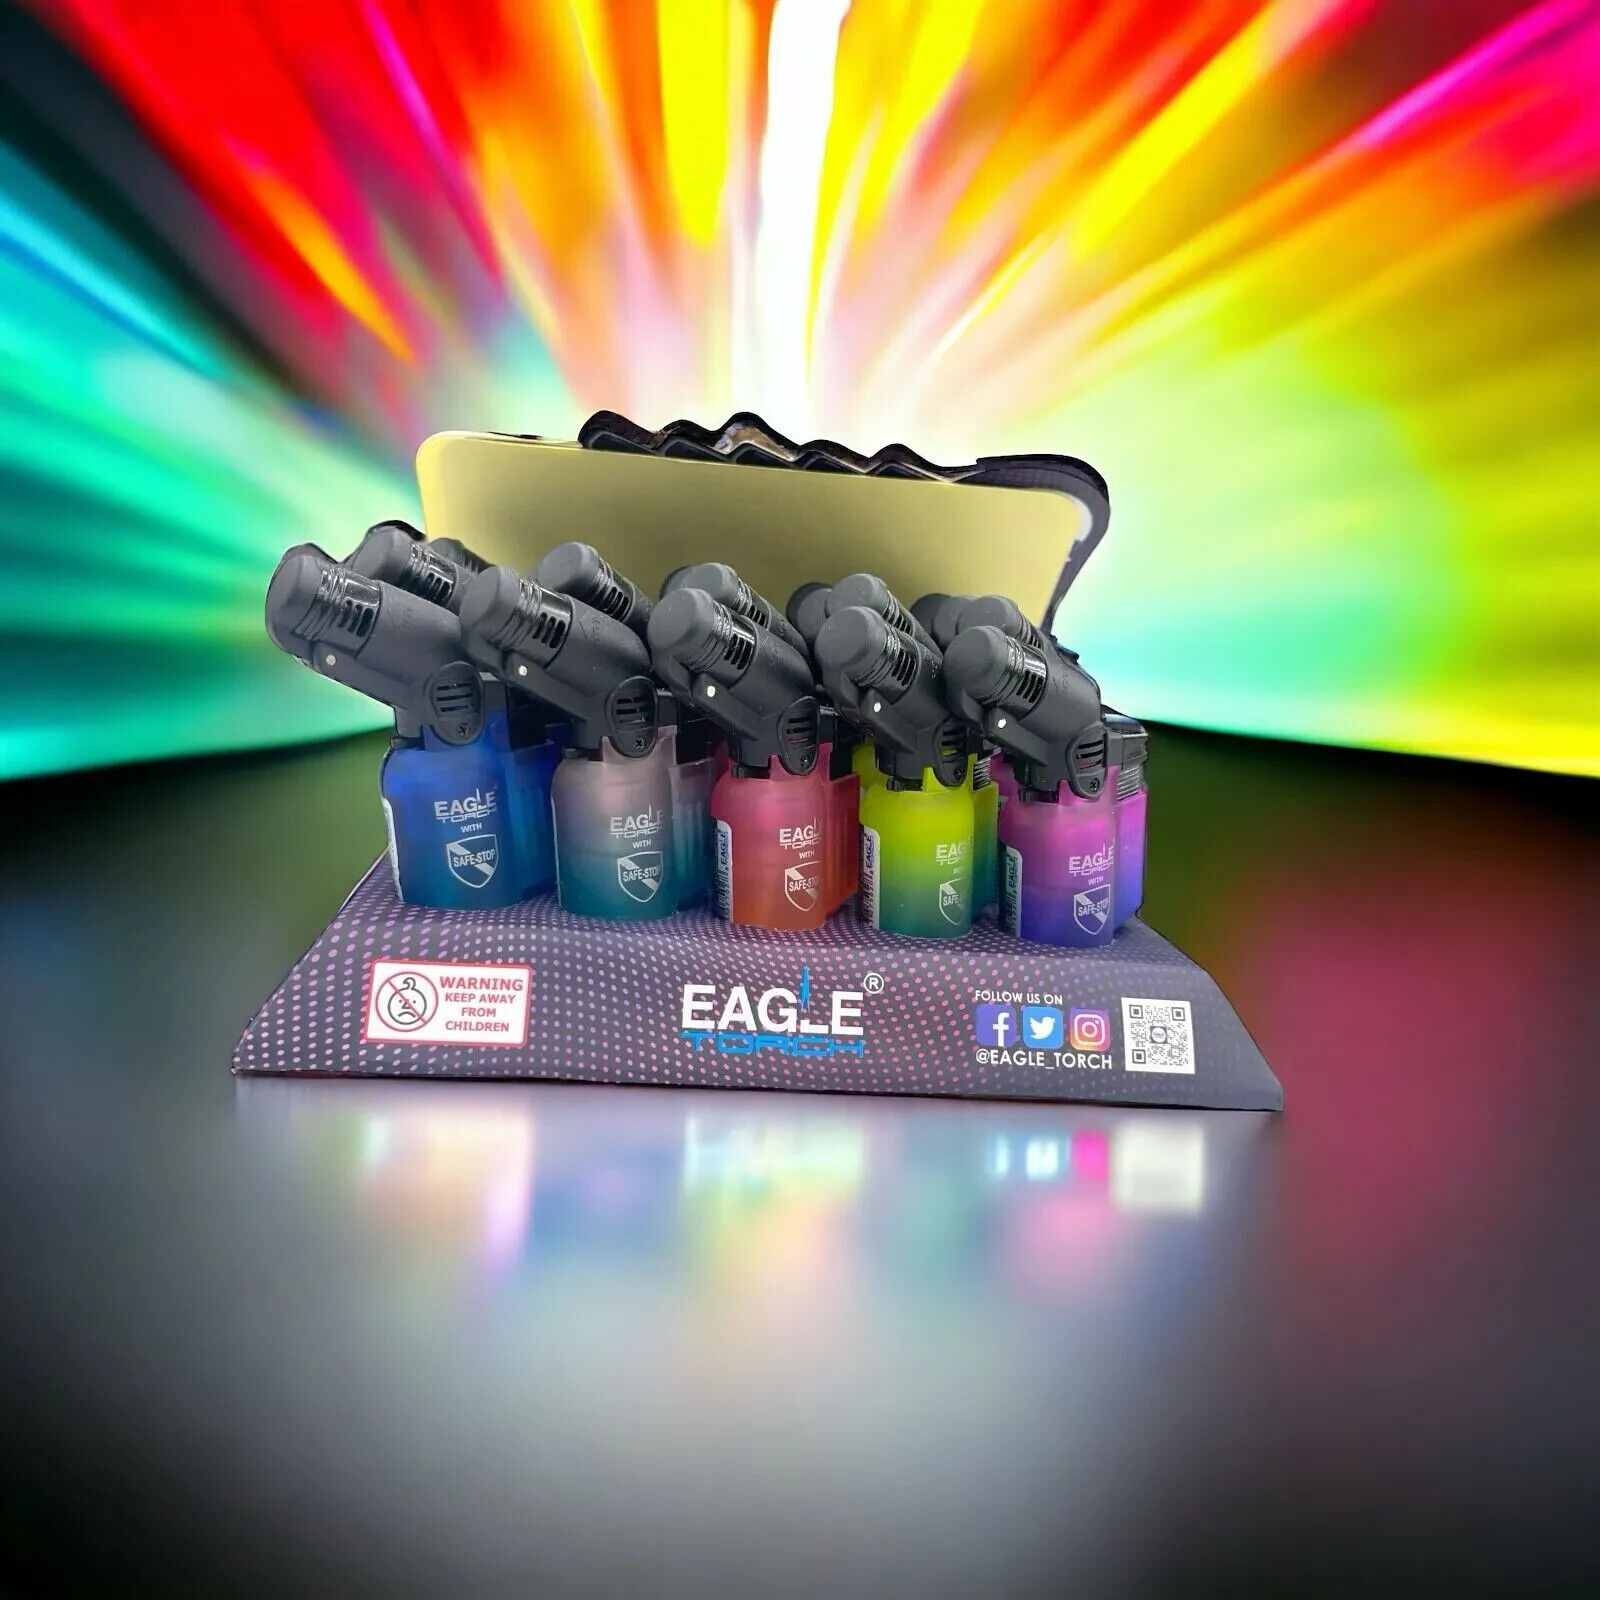 Eagle Torch - Mini Angled Gradient Torch Lighter 10 pack Get 10 Torch Lighters